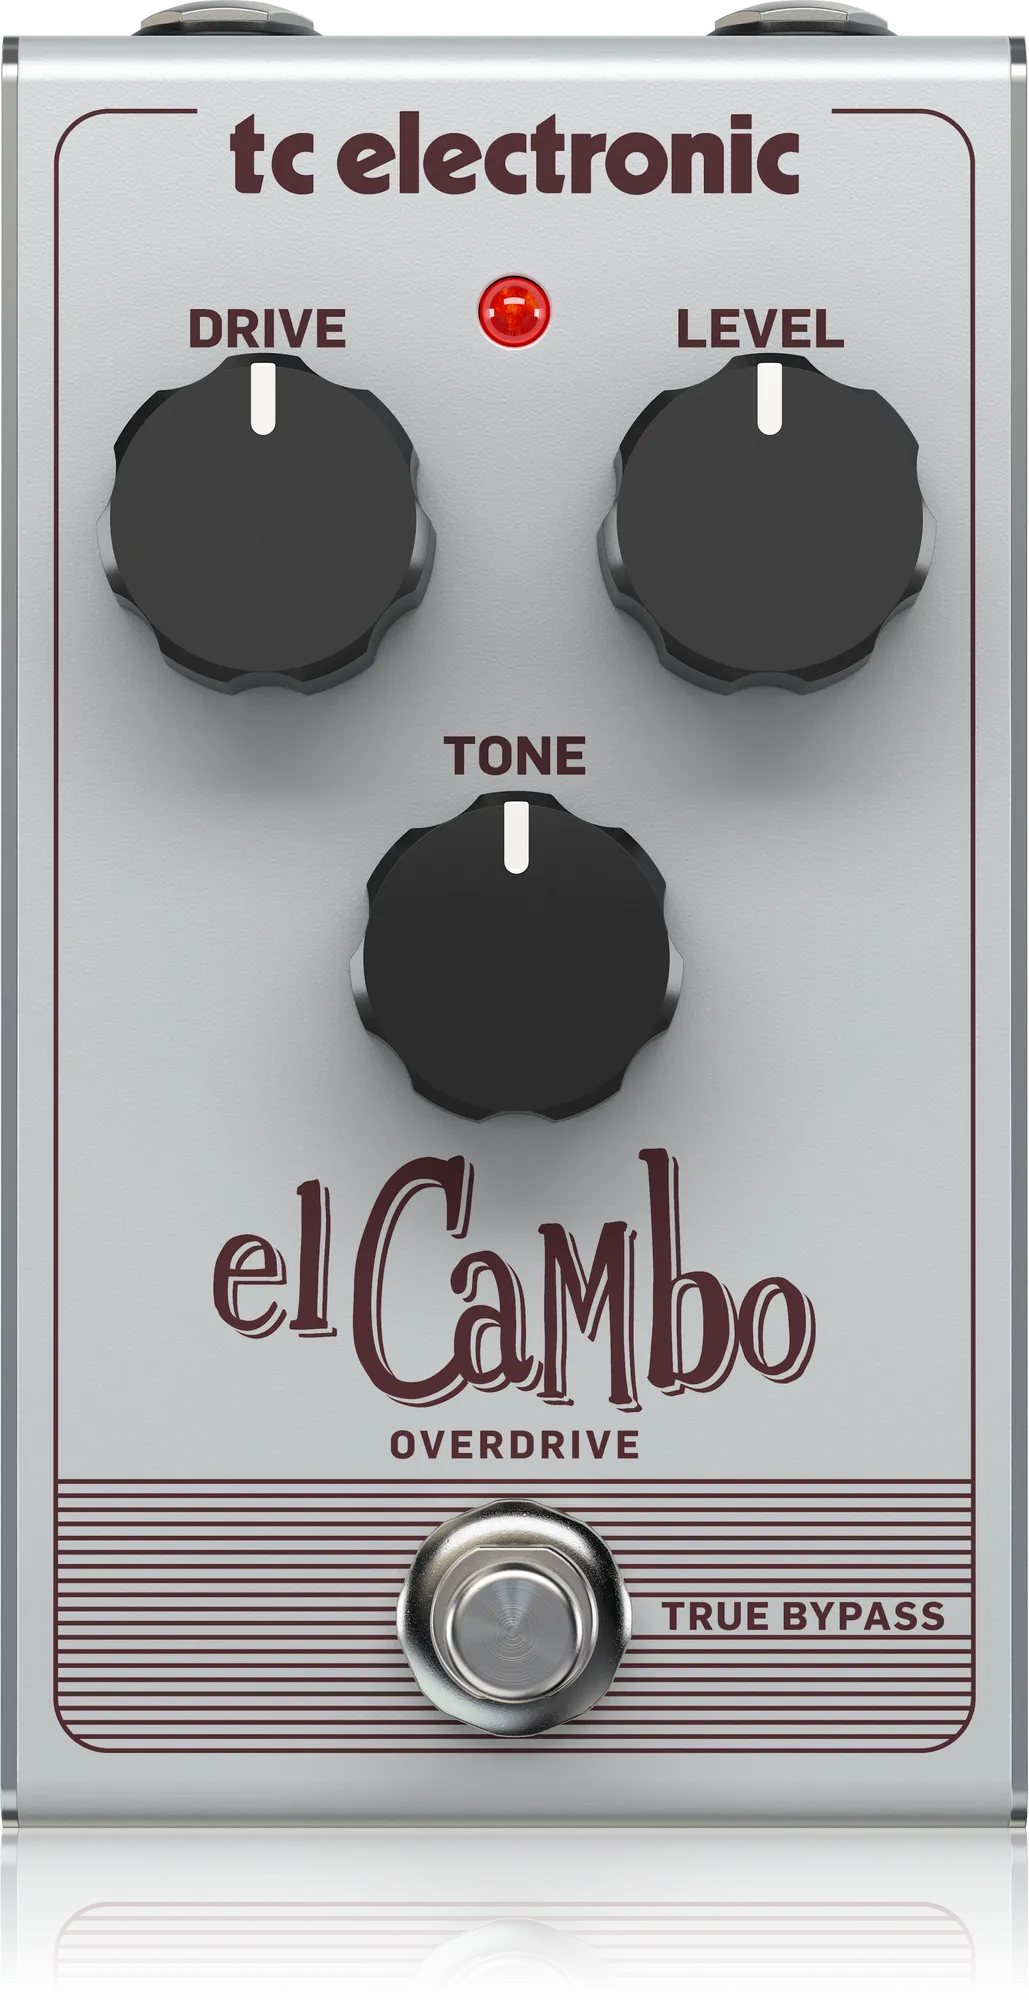 El Cambo Overdrive Guitar Pedal By TC Electronic